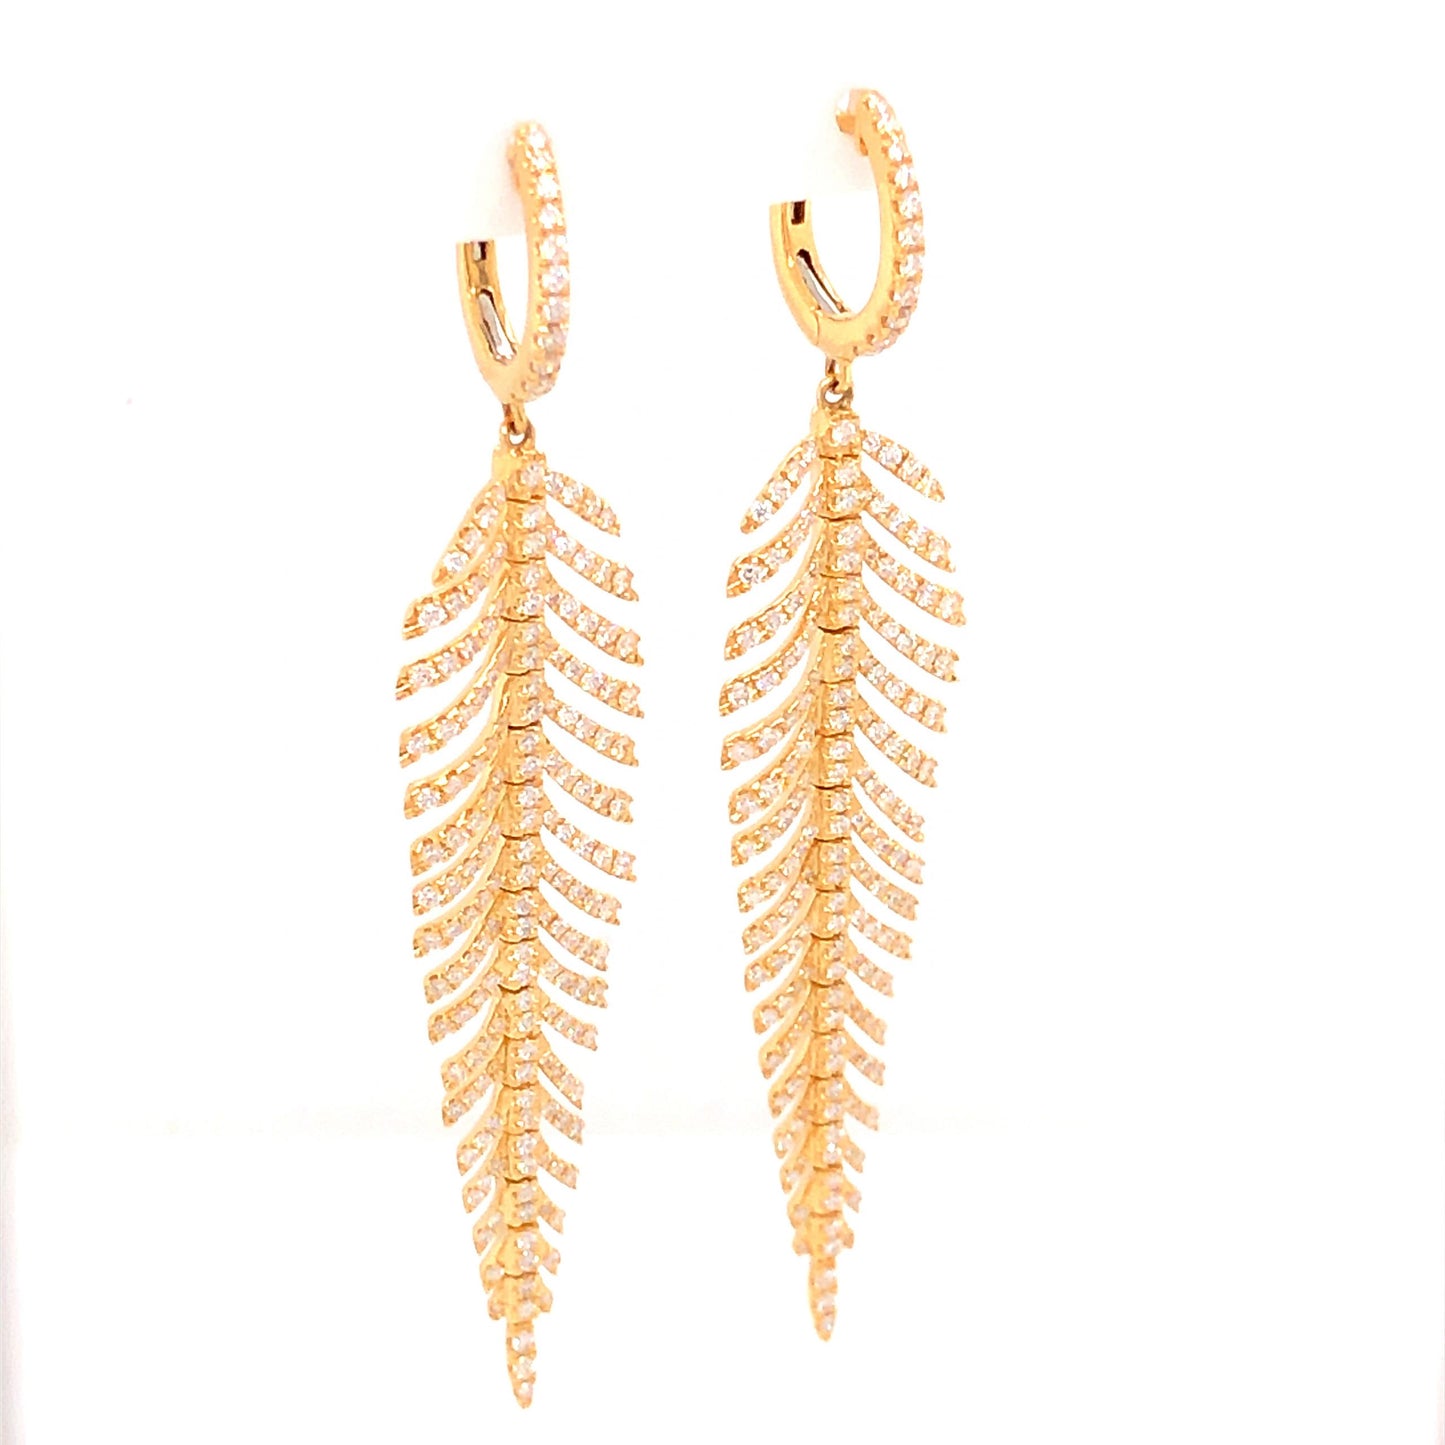 1.73 Pave Diamond Earrings in 18k Yellow Gold